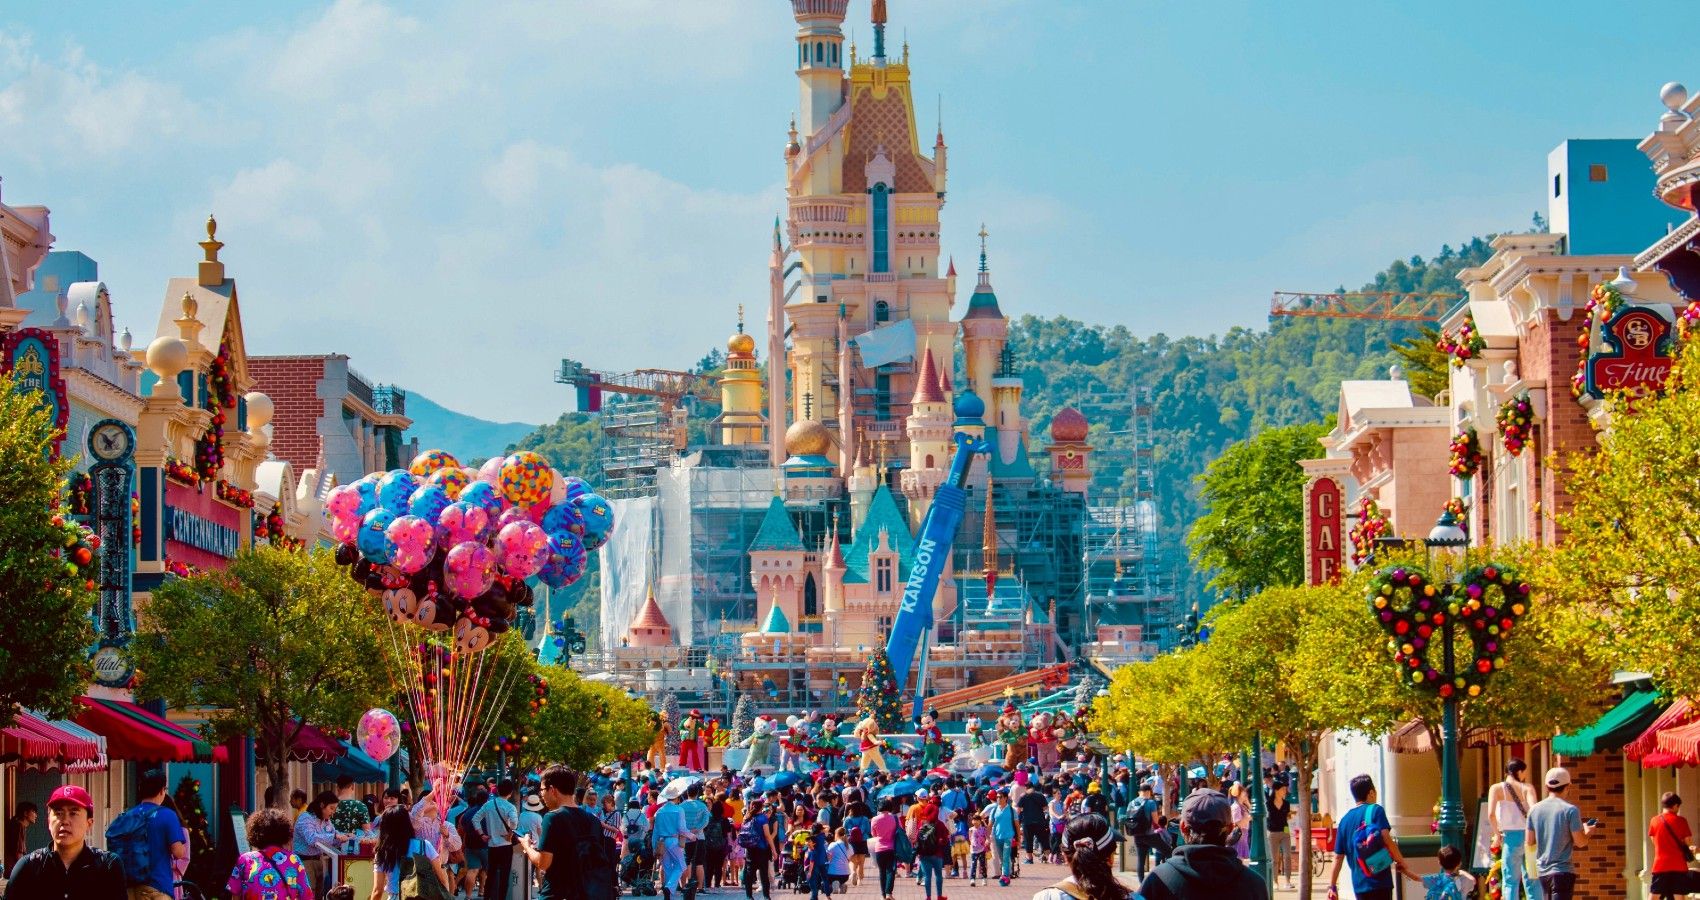 A view of the Disneyland castle and guests